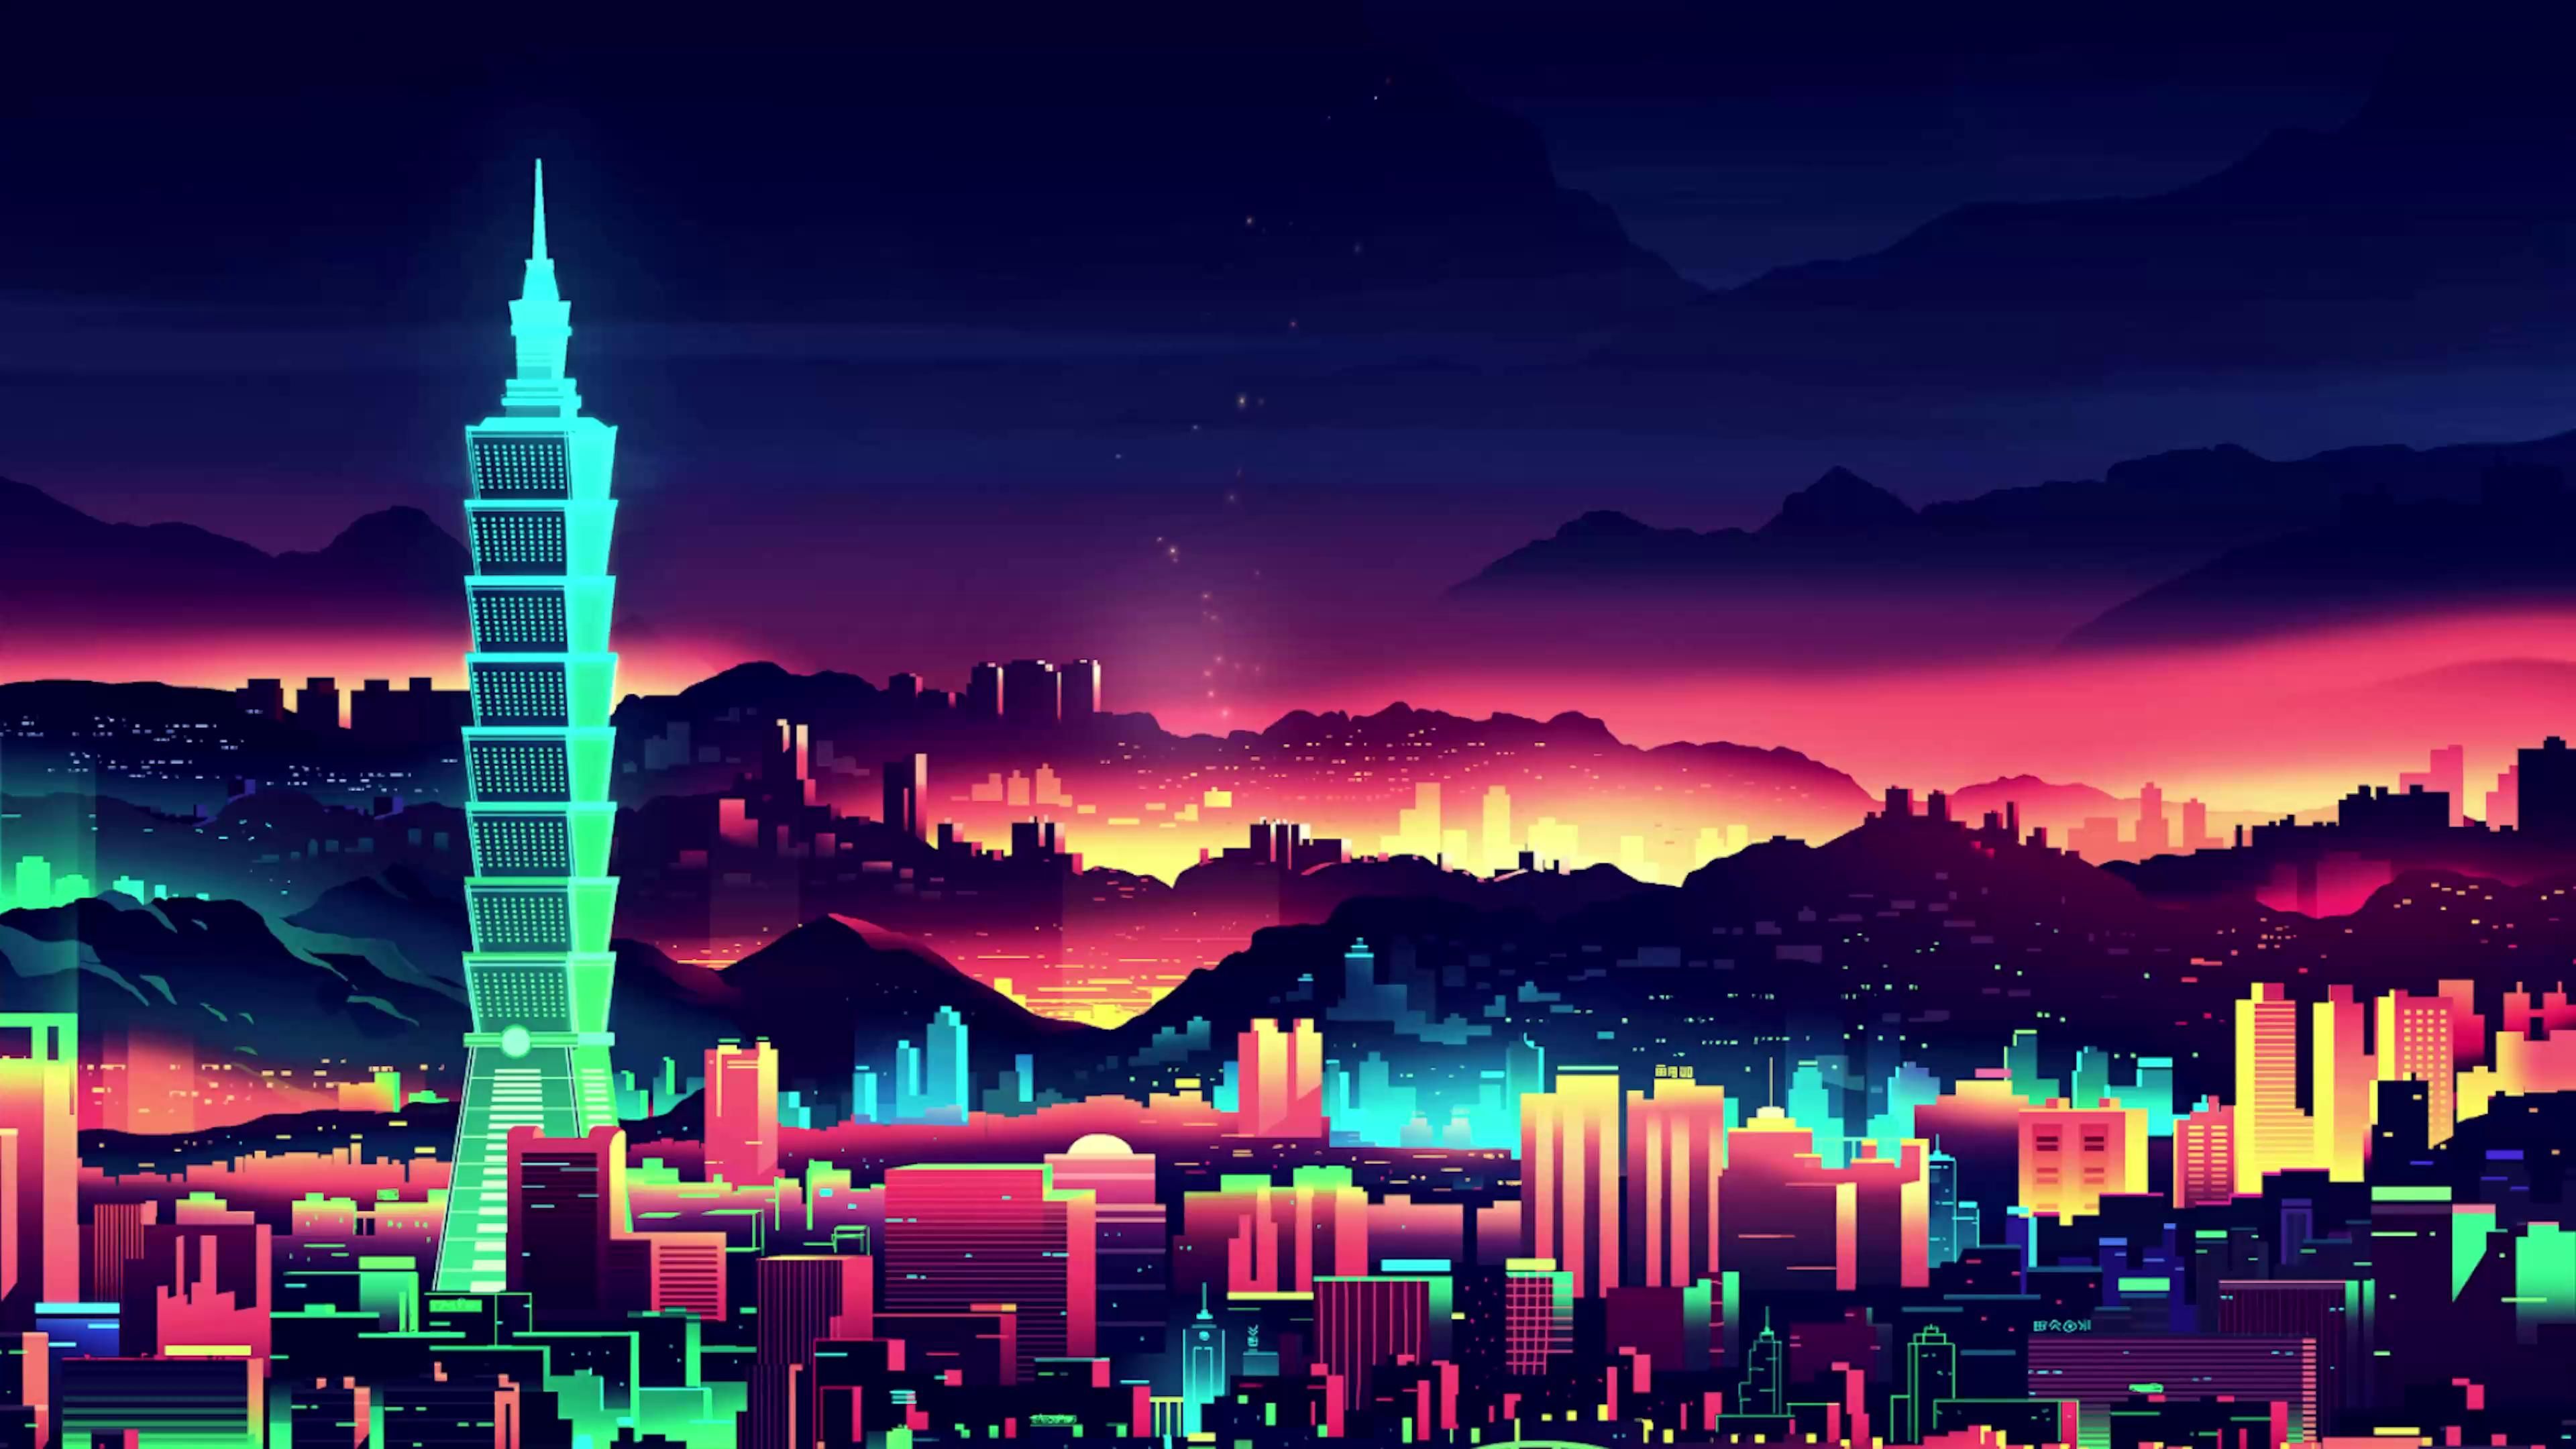 Aesthetic City At The Night Live Wallpaper